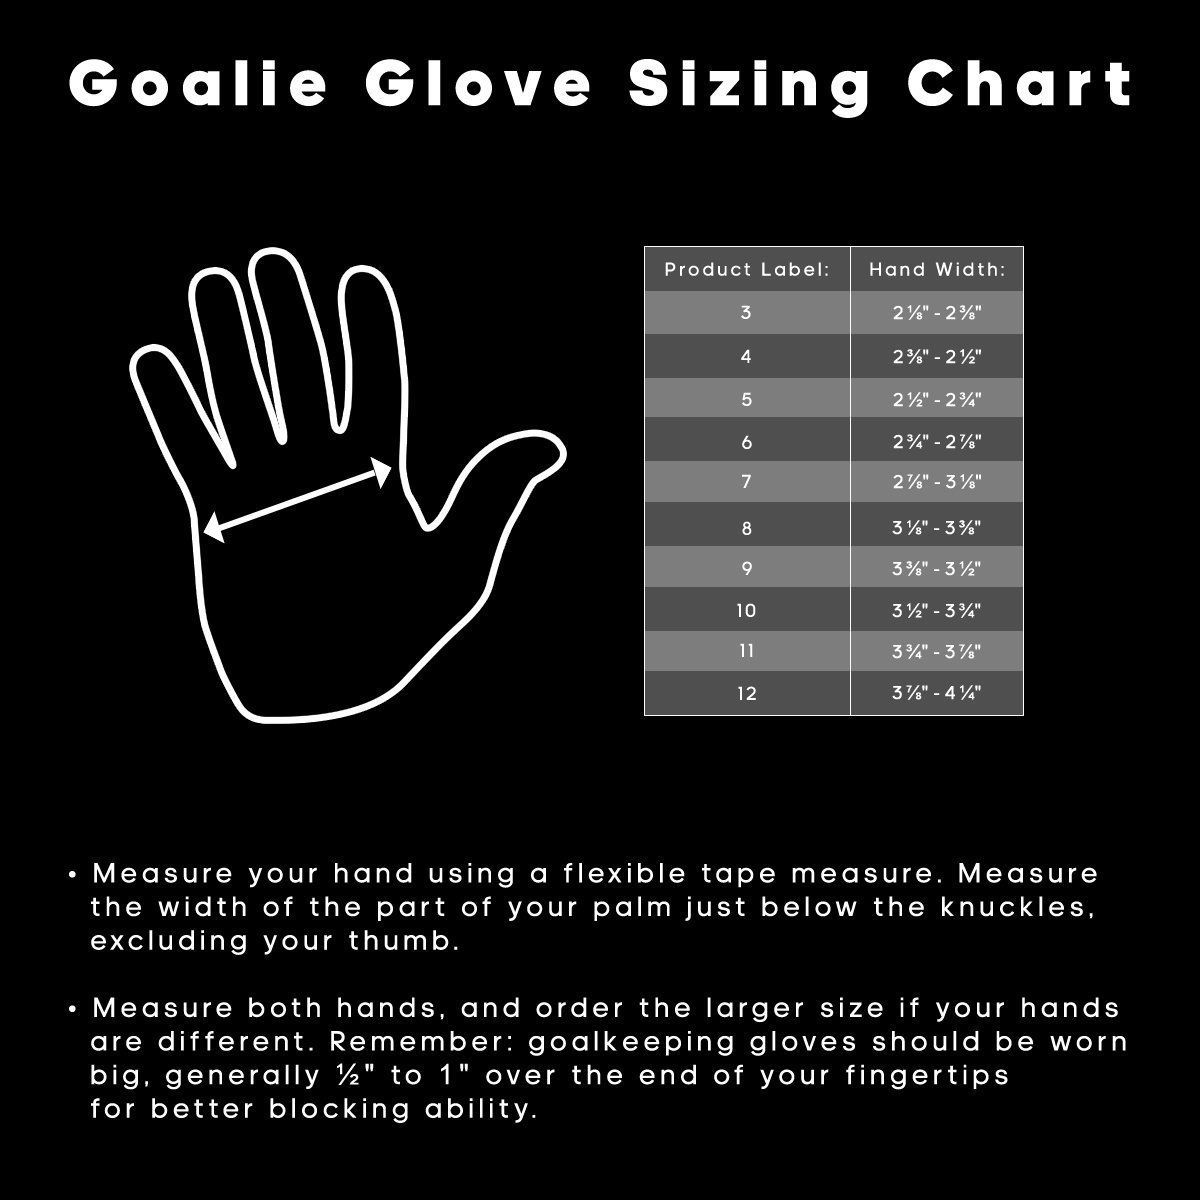 Please use this when sizing your gloves 